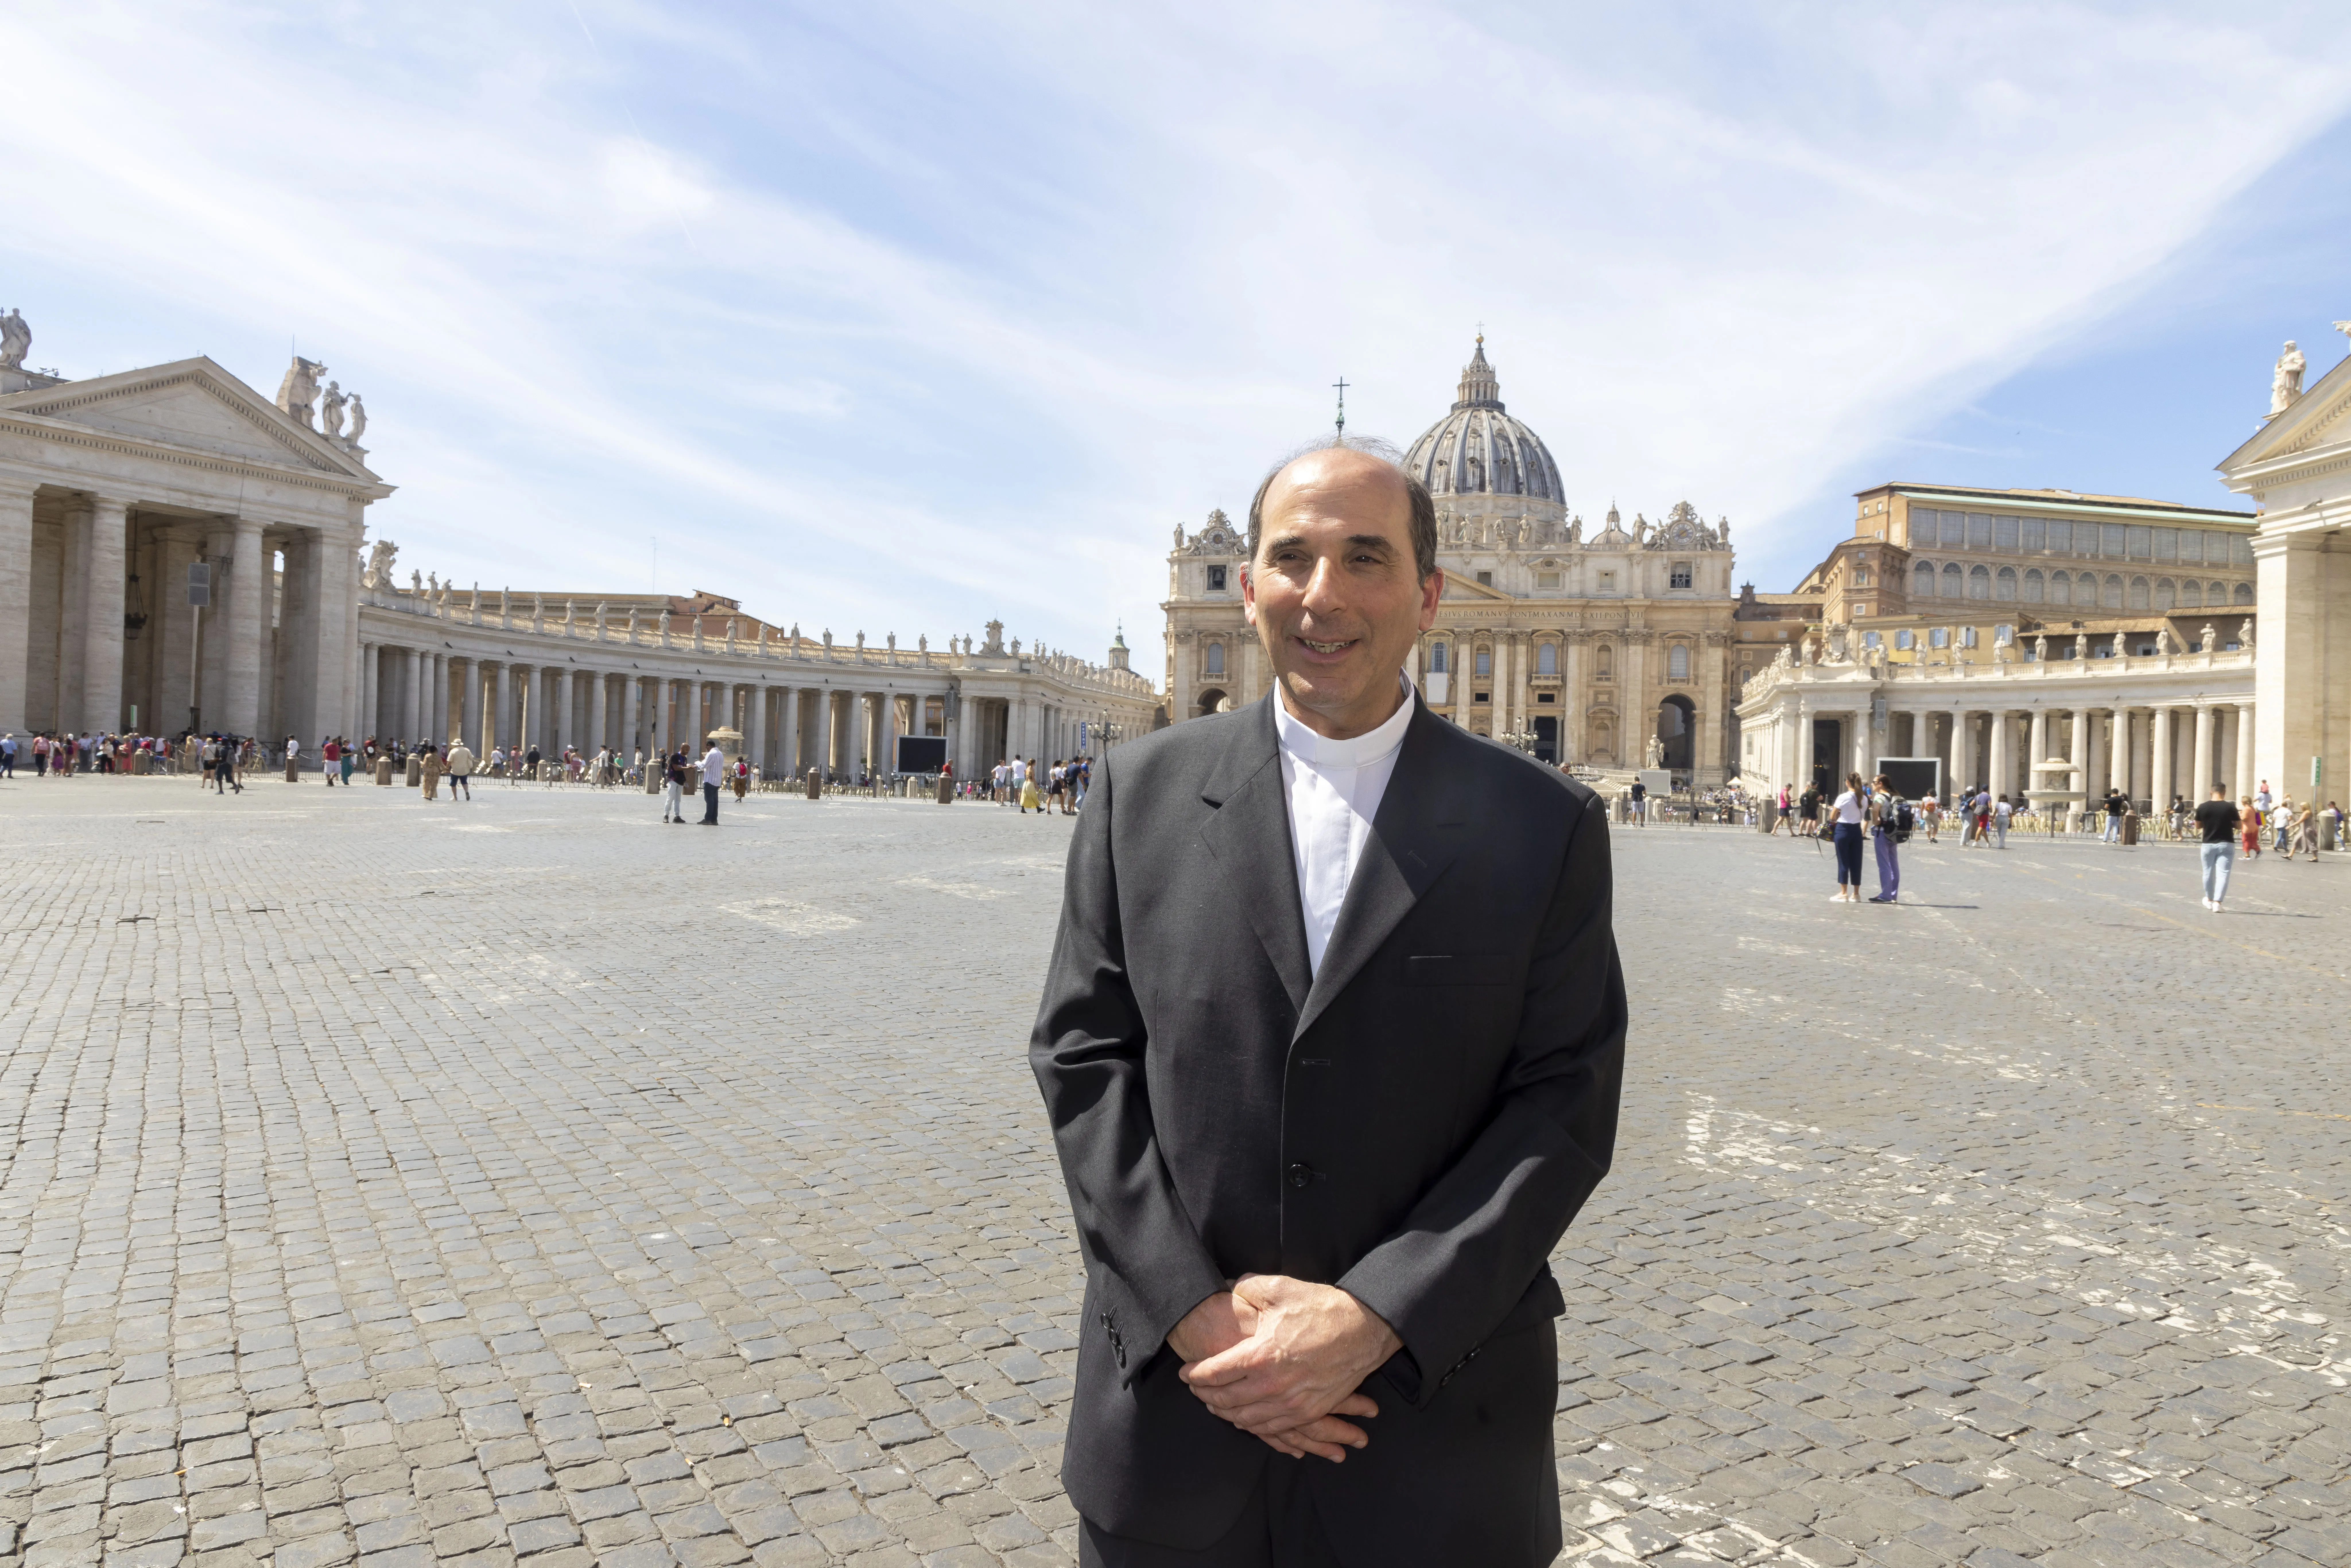 Father José Dabusti, a priest of Buenos Aires, Argentina, is in Rome to attend Pope John Paul I's beatification. Pablo Esparza/CNA